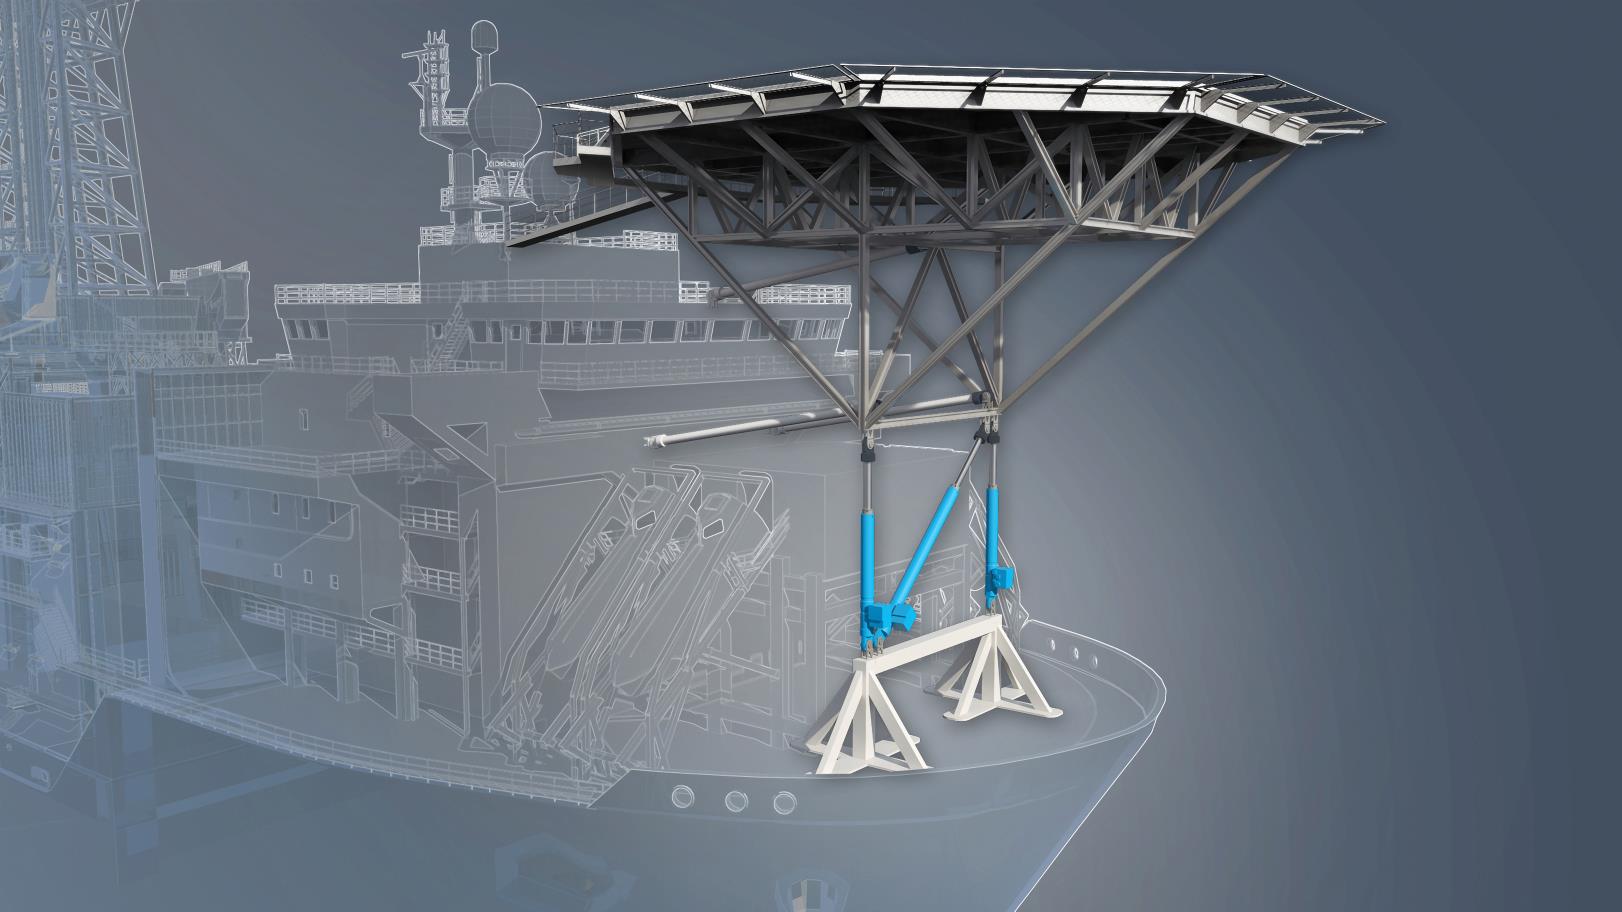 Motion Compensated Helideck Stirs Offshore Industry’s Interest